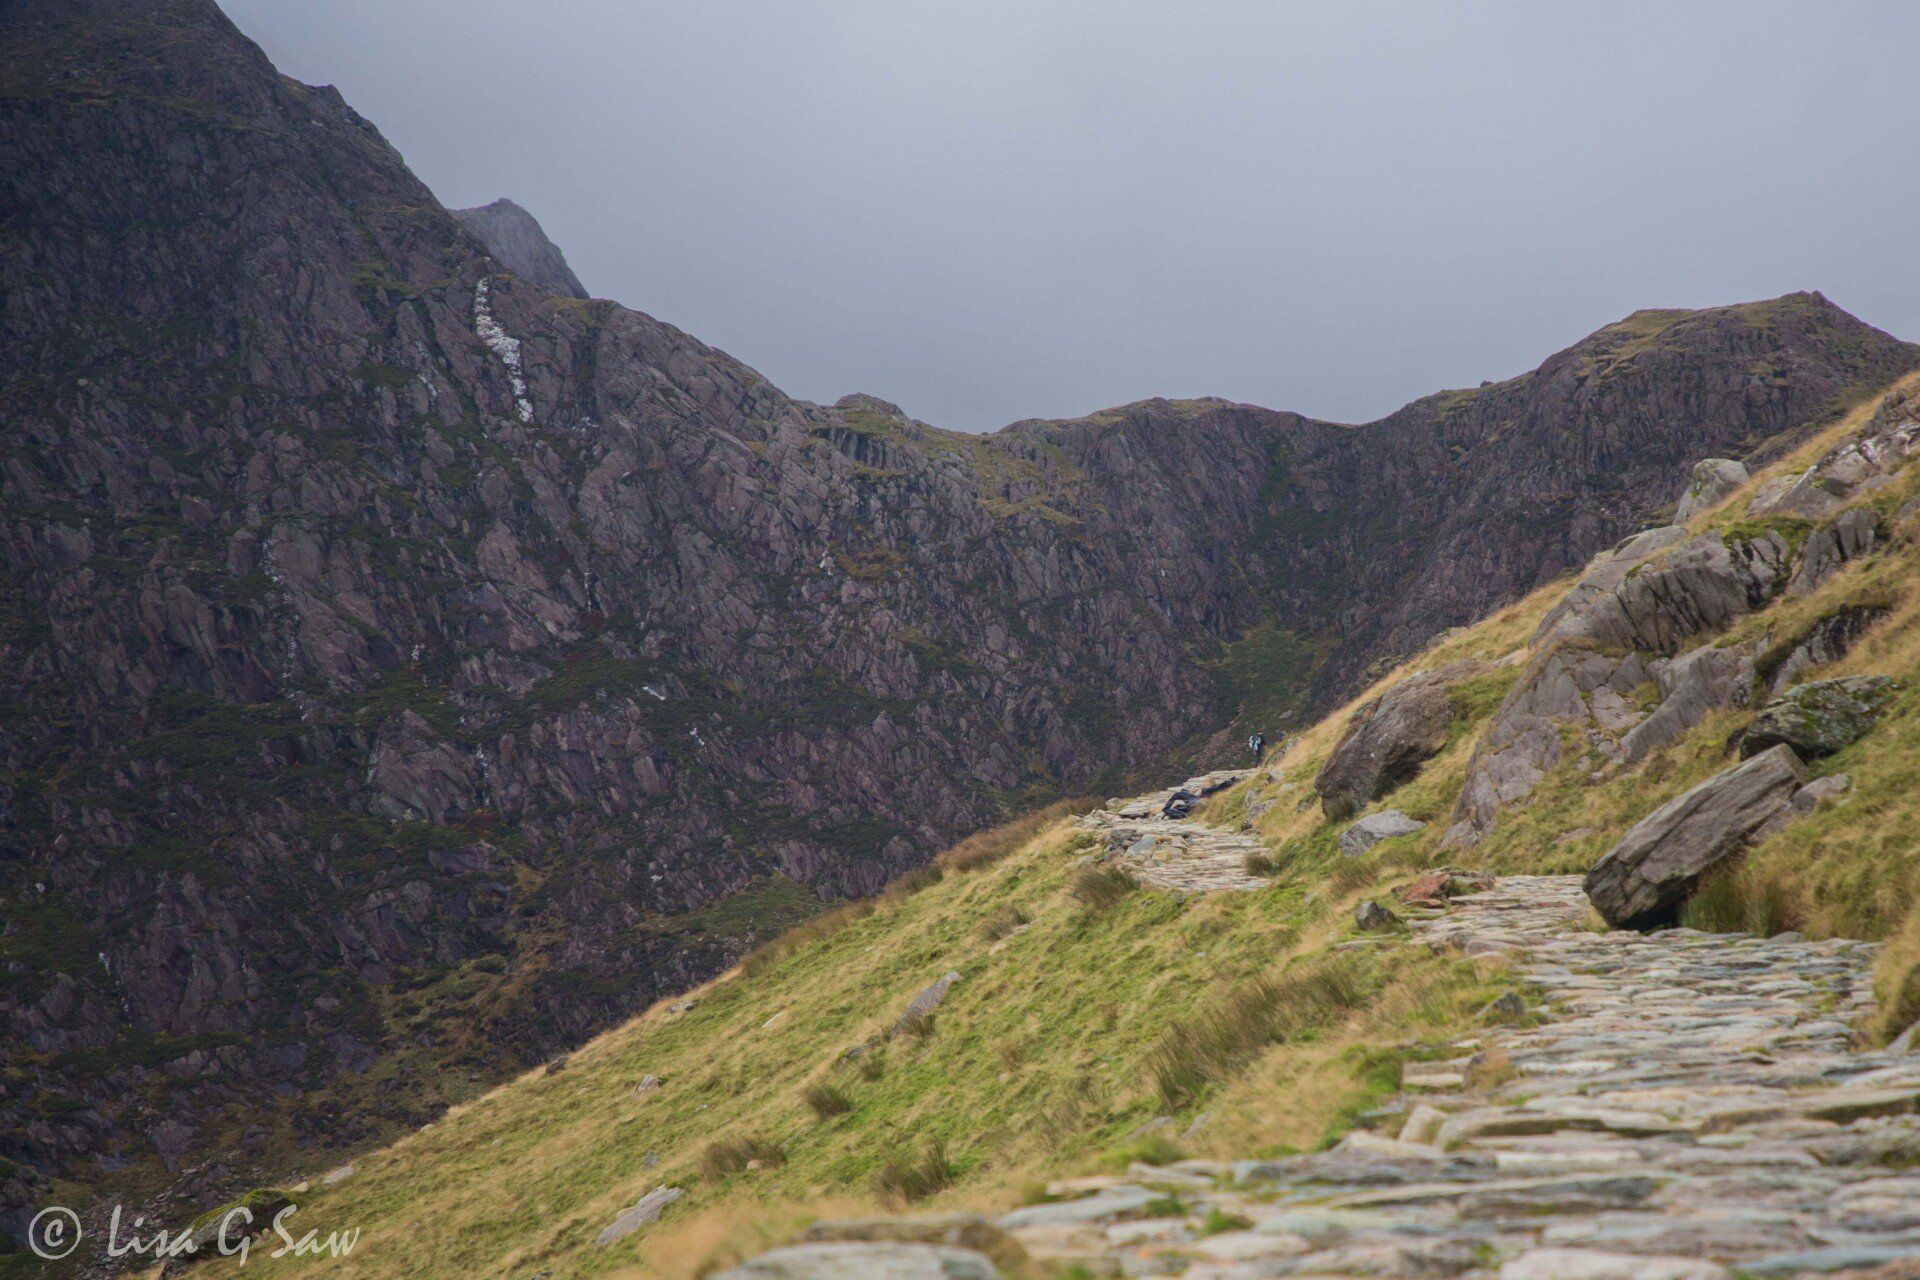 Stone path up mountains along Miners Track, Snowdonia National Park